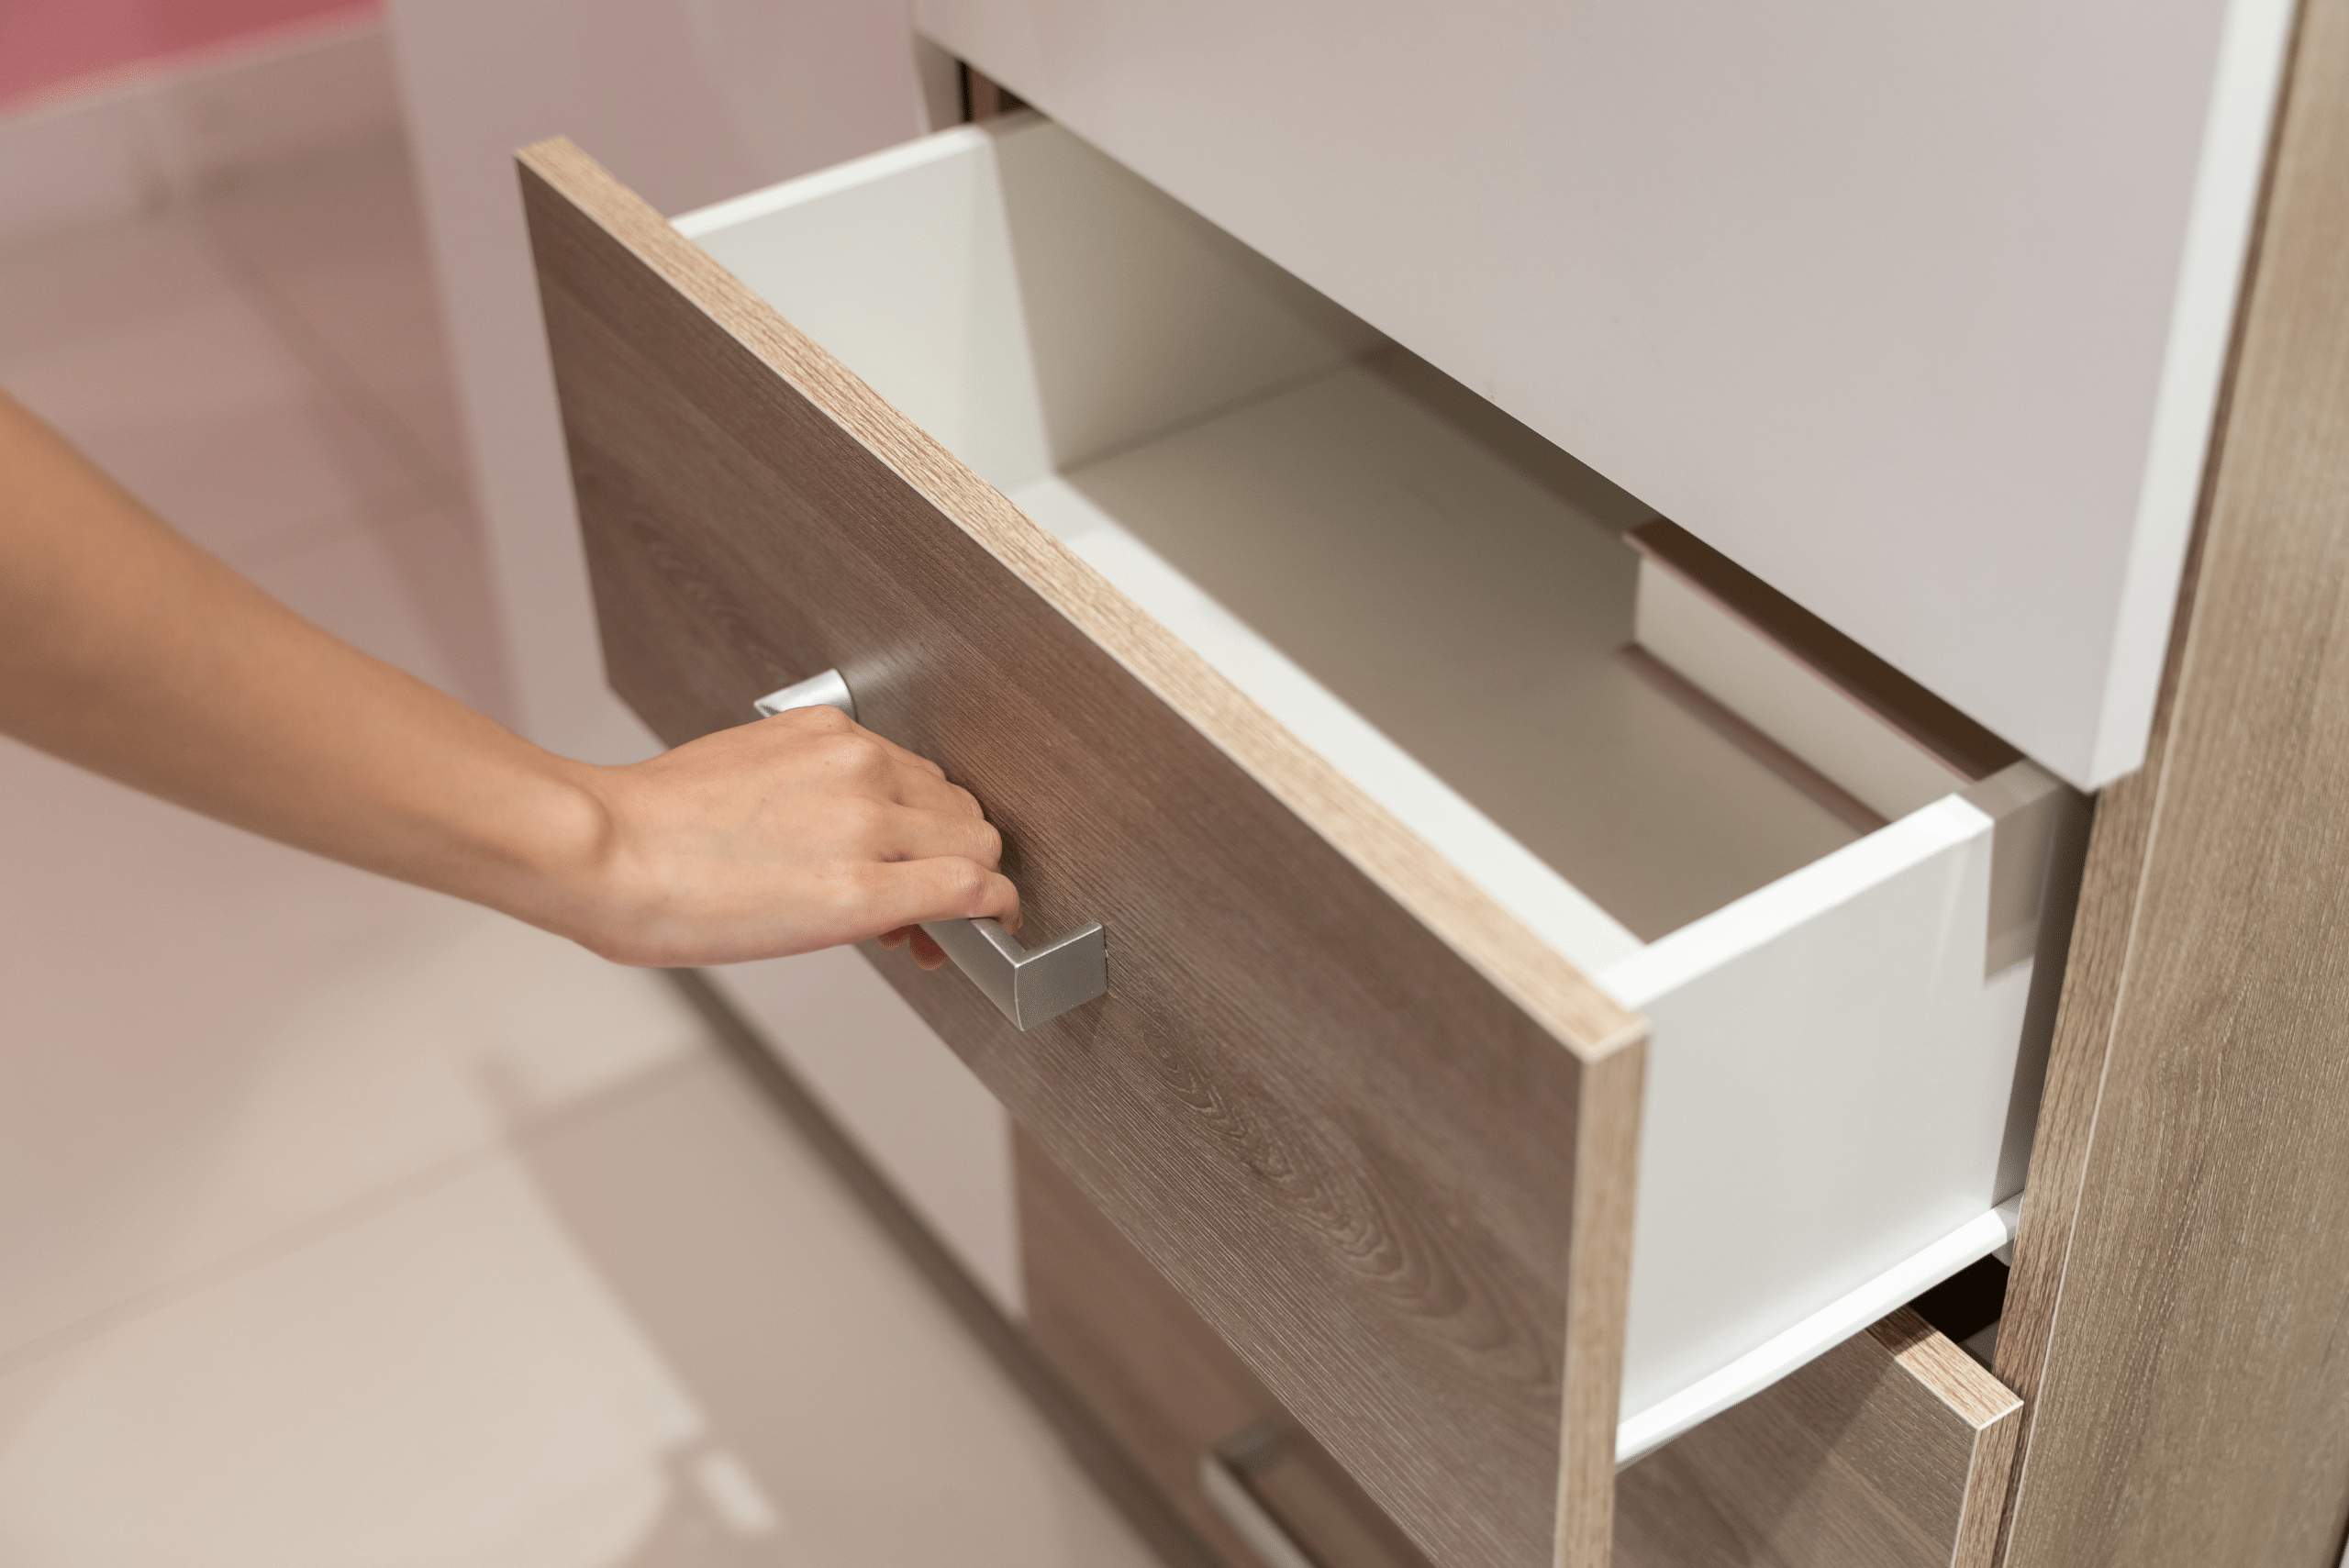 A person pulling open a wooden drawer.